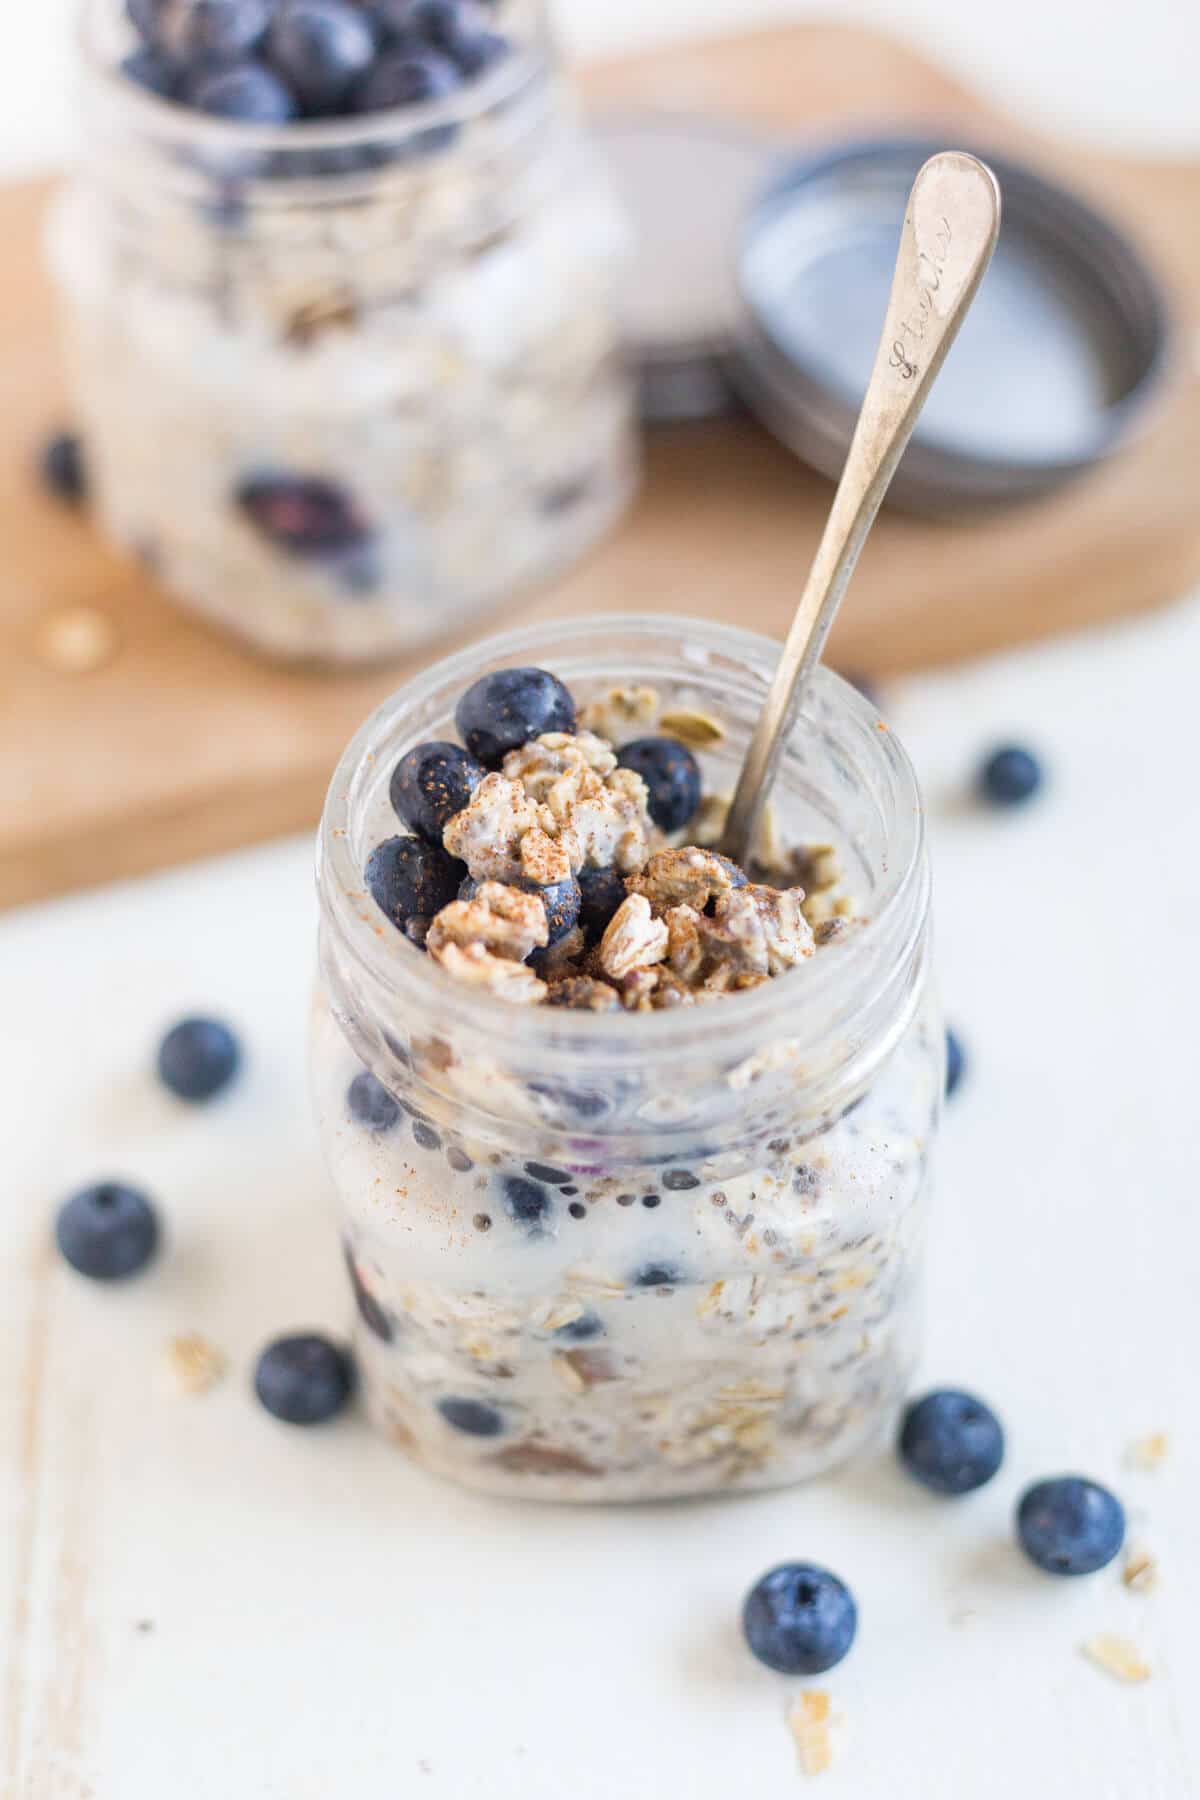 a spoon scooping blueberry overnight oats out of a jar